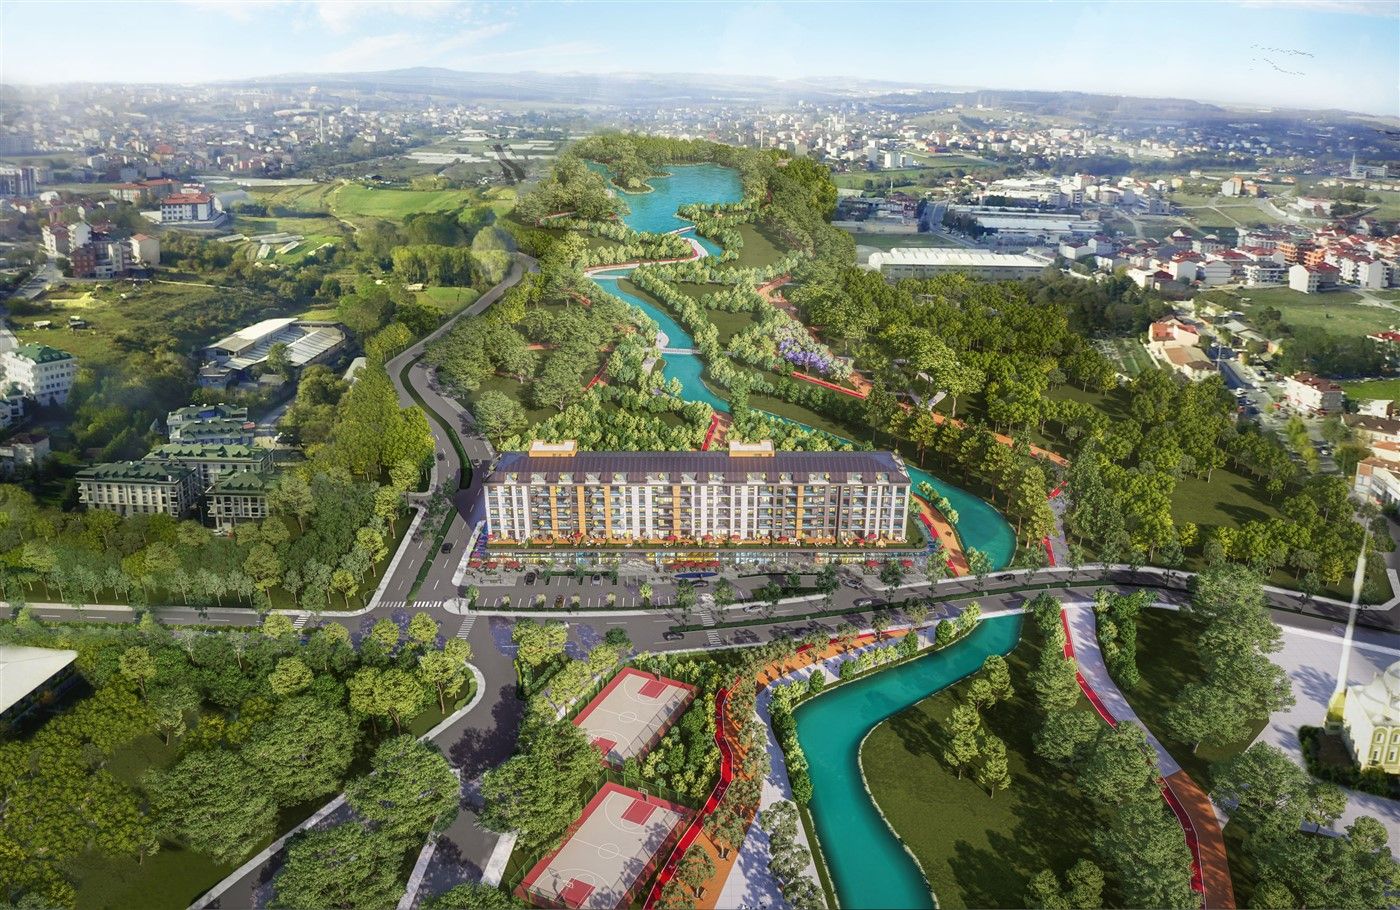 Large-scale project near the national park - Istanbul